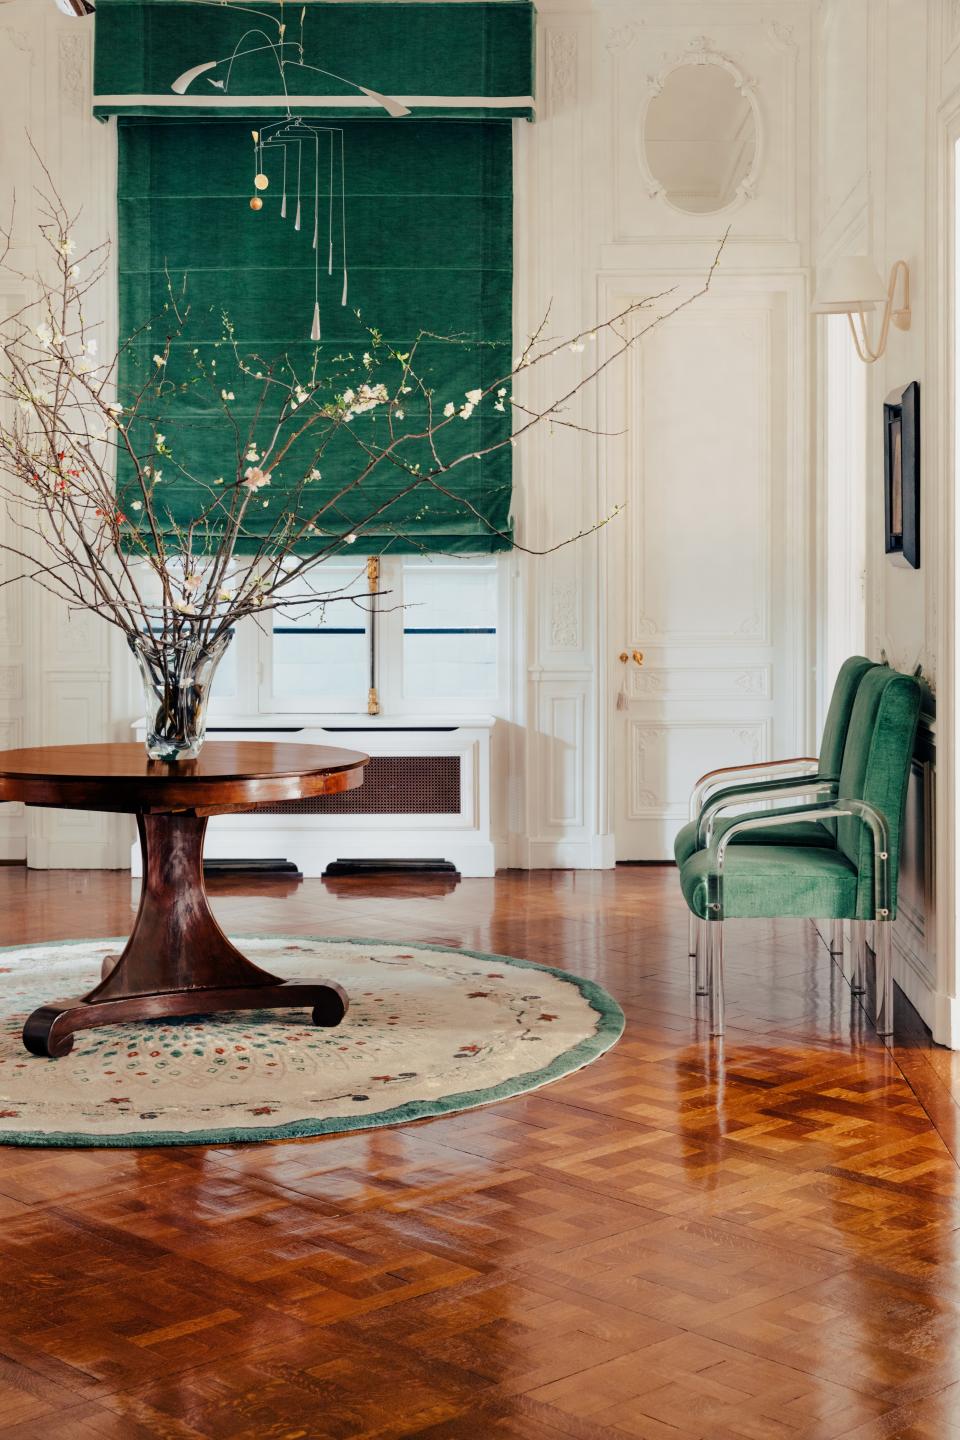 A Claude Kintzler mobile hangs in a hall whose shade and valance are made of a Clarence House fabric. 1930s table; Maison Leleu rug; Jean Royère sconce.